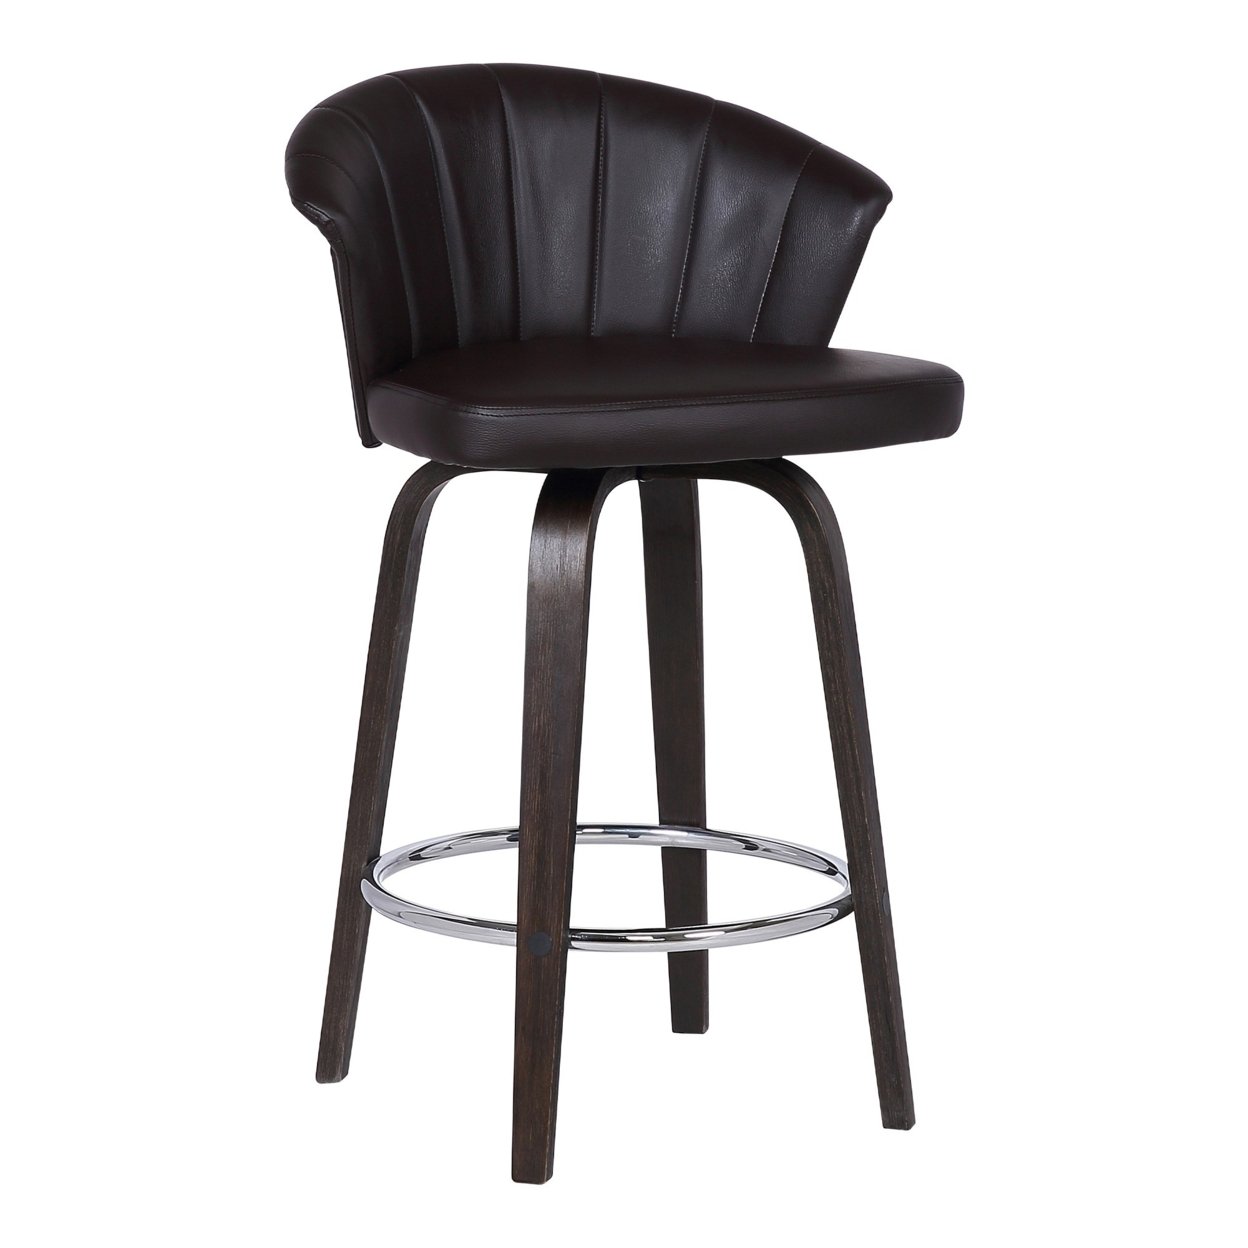 30 Channel Stitched Faux Leather Barstool With Tapered Legs, Brown- Saltoro Sherpi